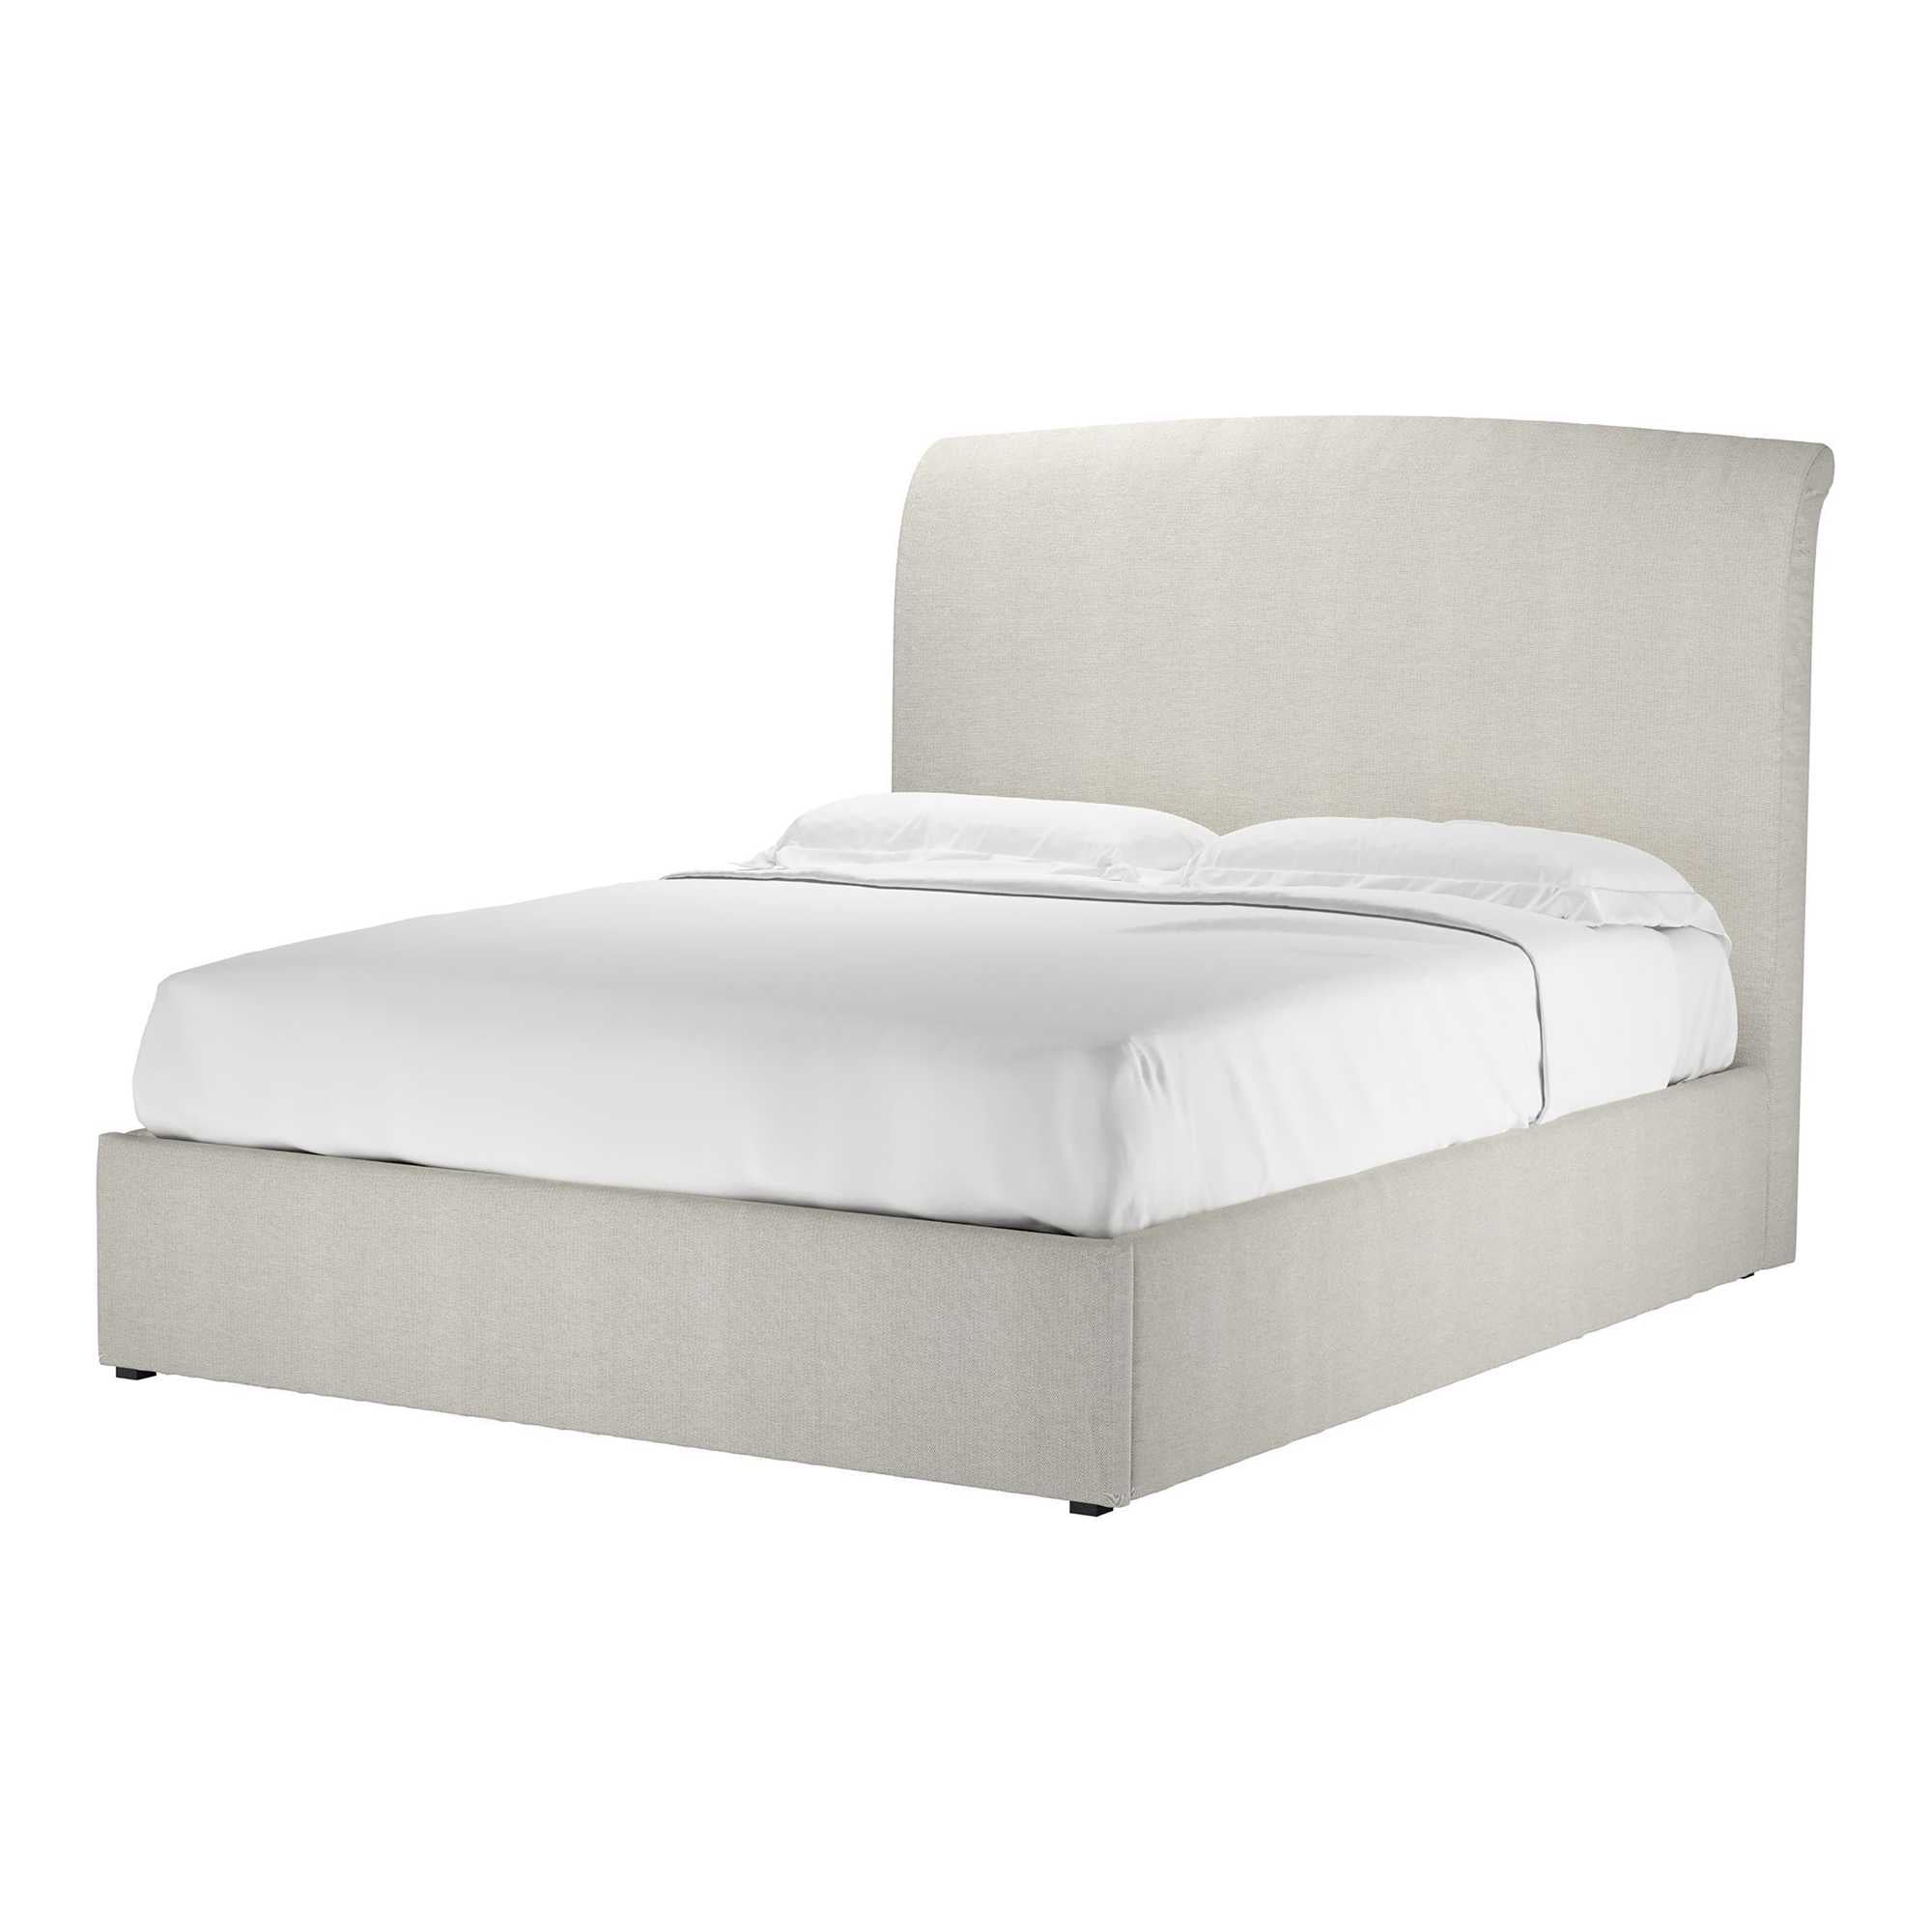 Thea Clay House Basket Weave Ottoman Bed - King Size